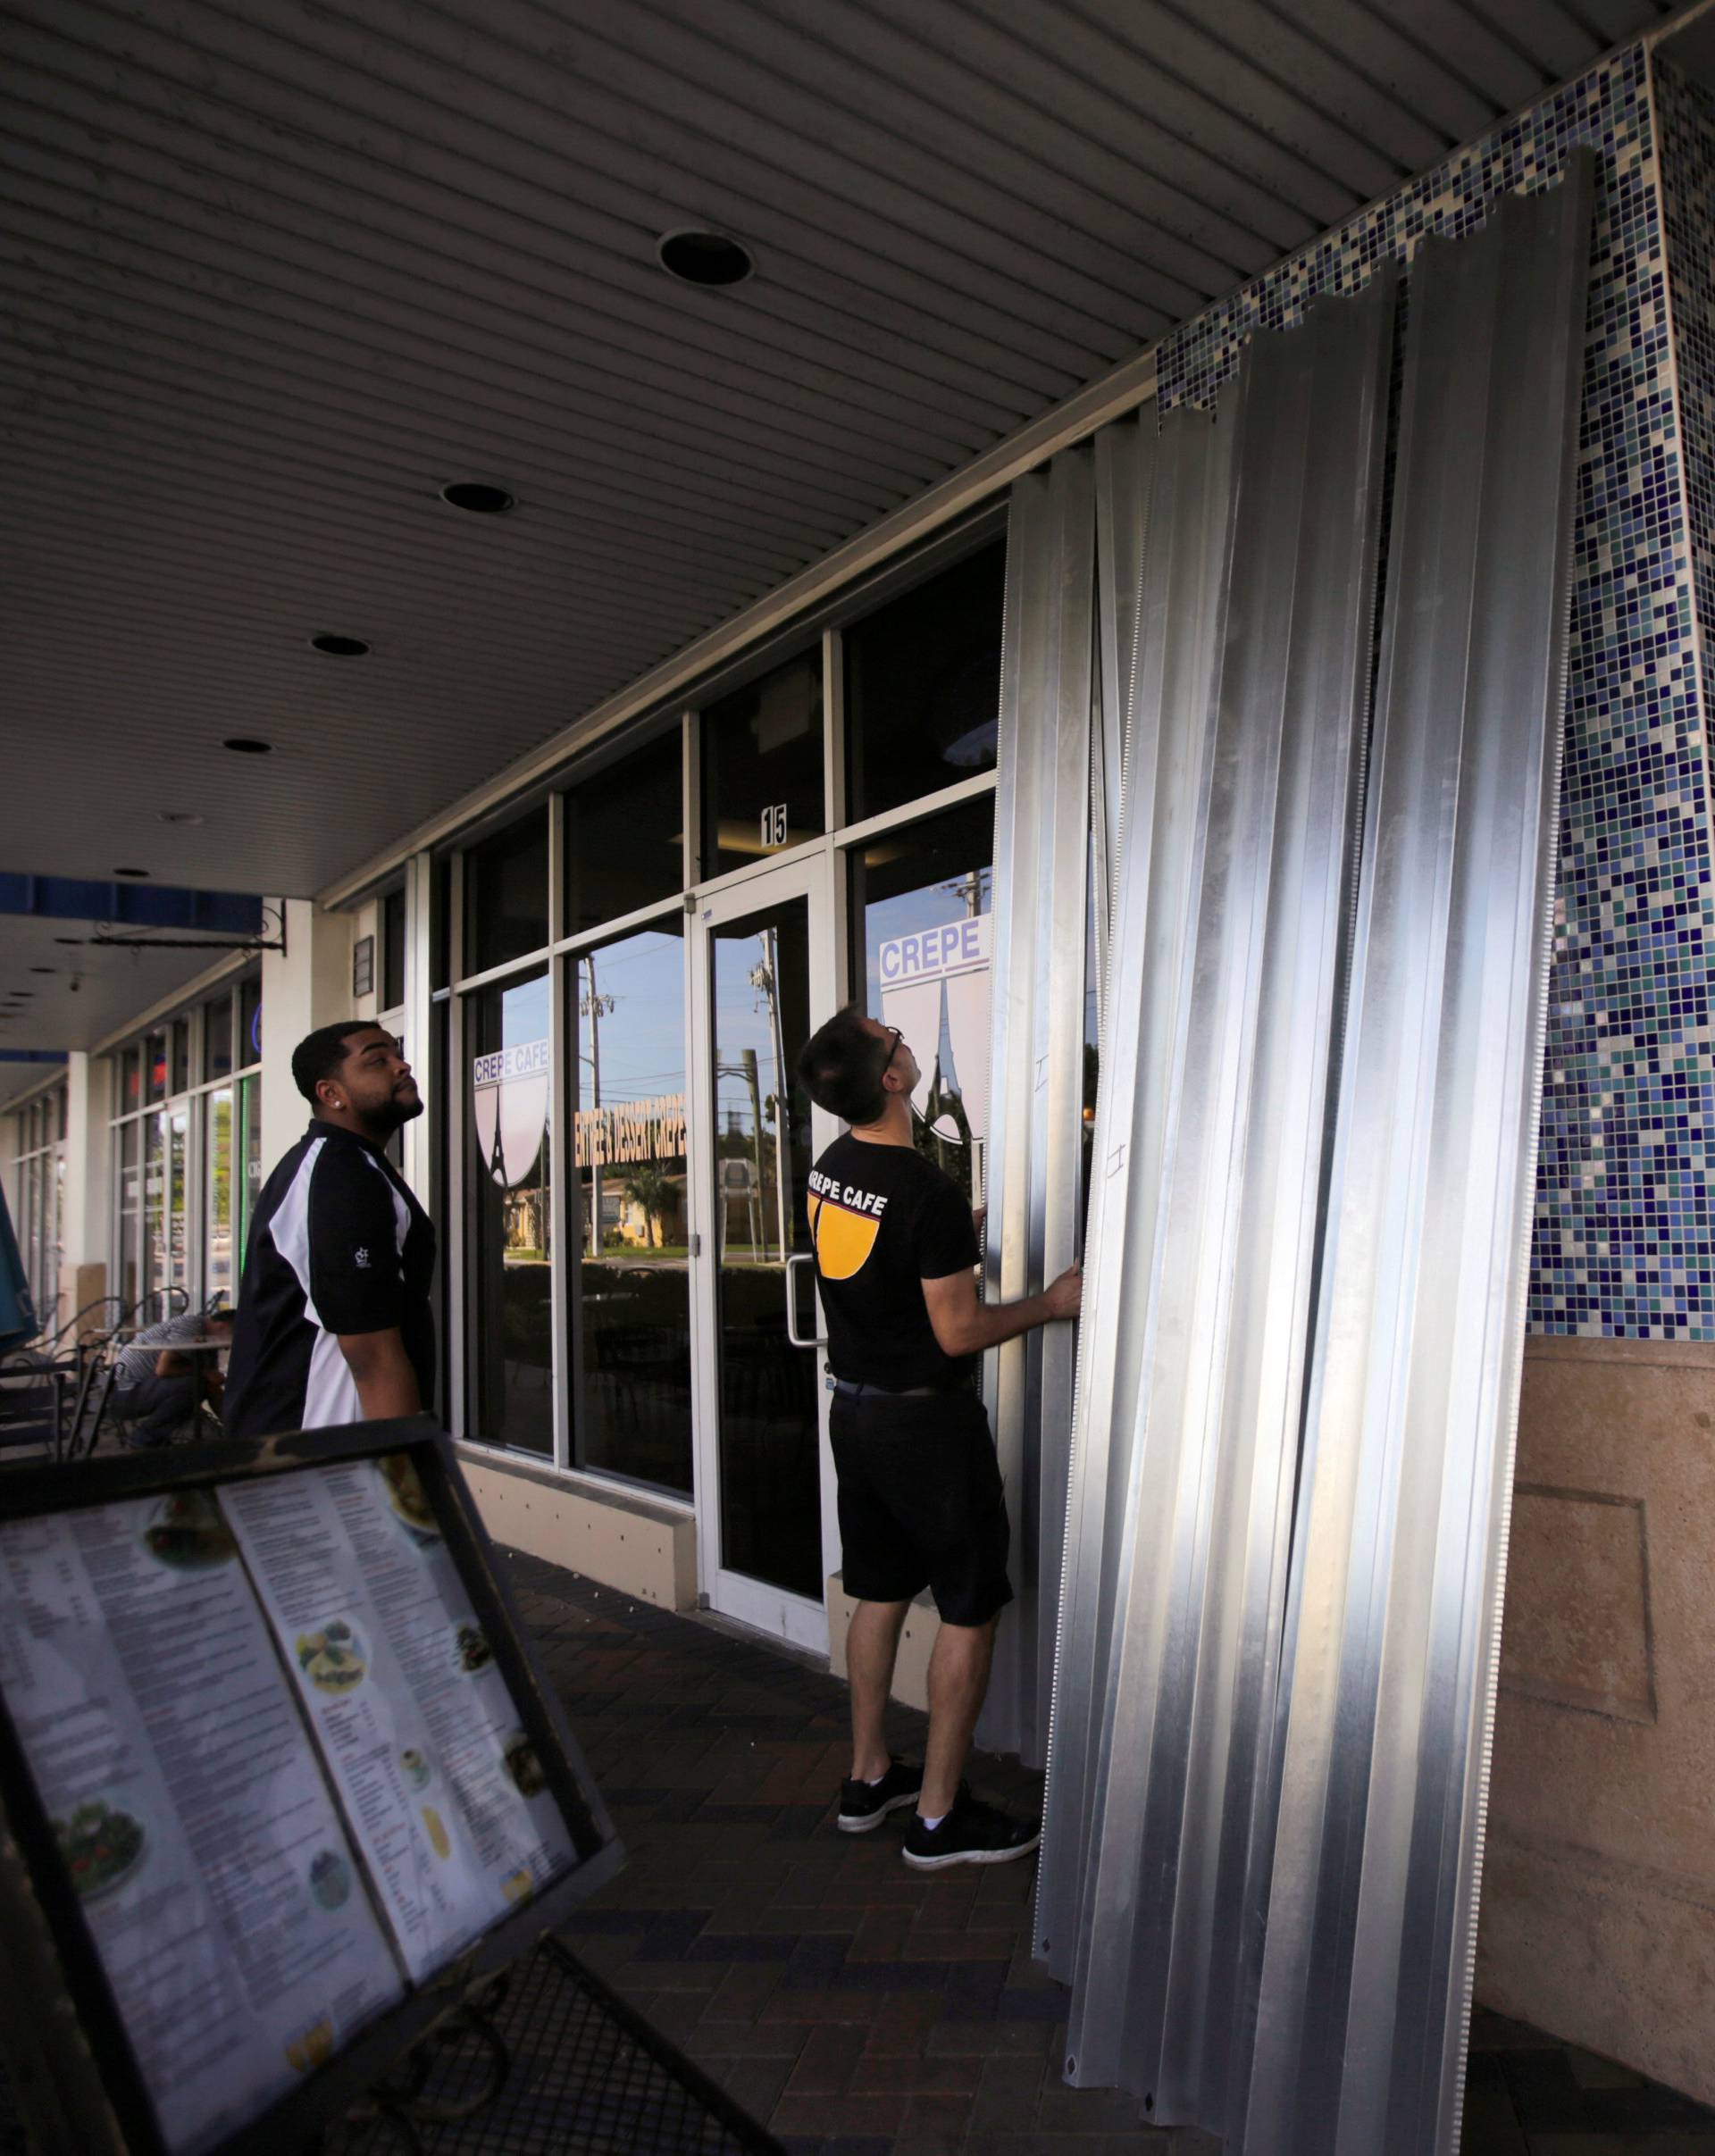 Employees cover the doors and windows at a restaurant in Deerfield beach near Coral Springs in anticipation of Hurricane Matthew in Florida